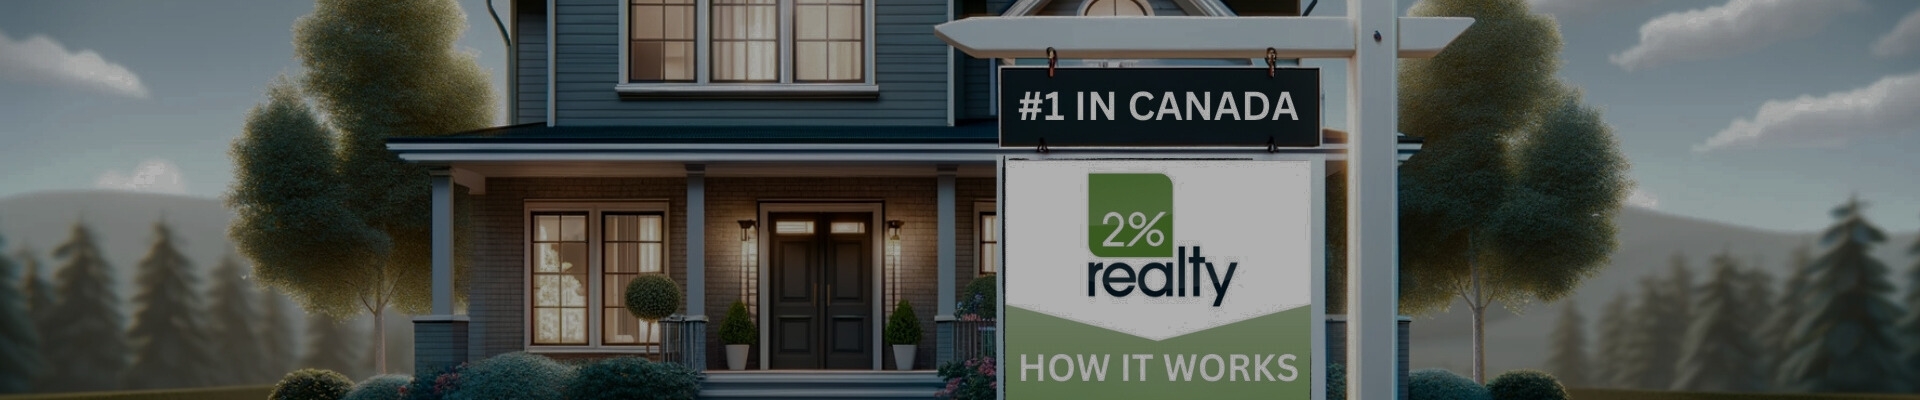 How does 2 Percent Realty Work. Learn about our Lower commission brokerage and frequently asked questions.